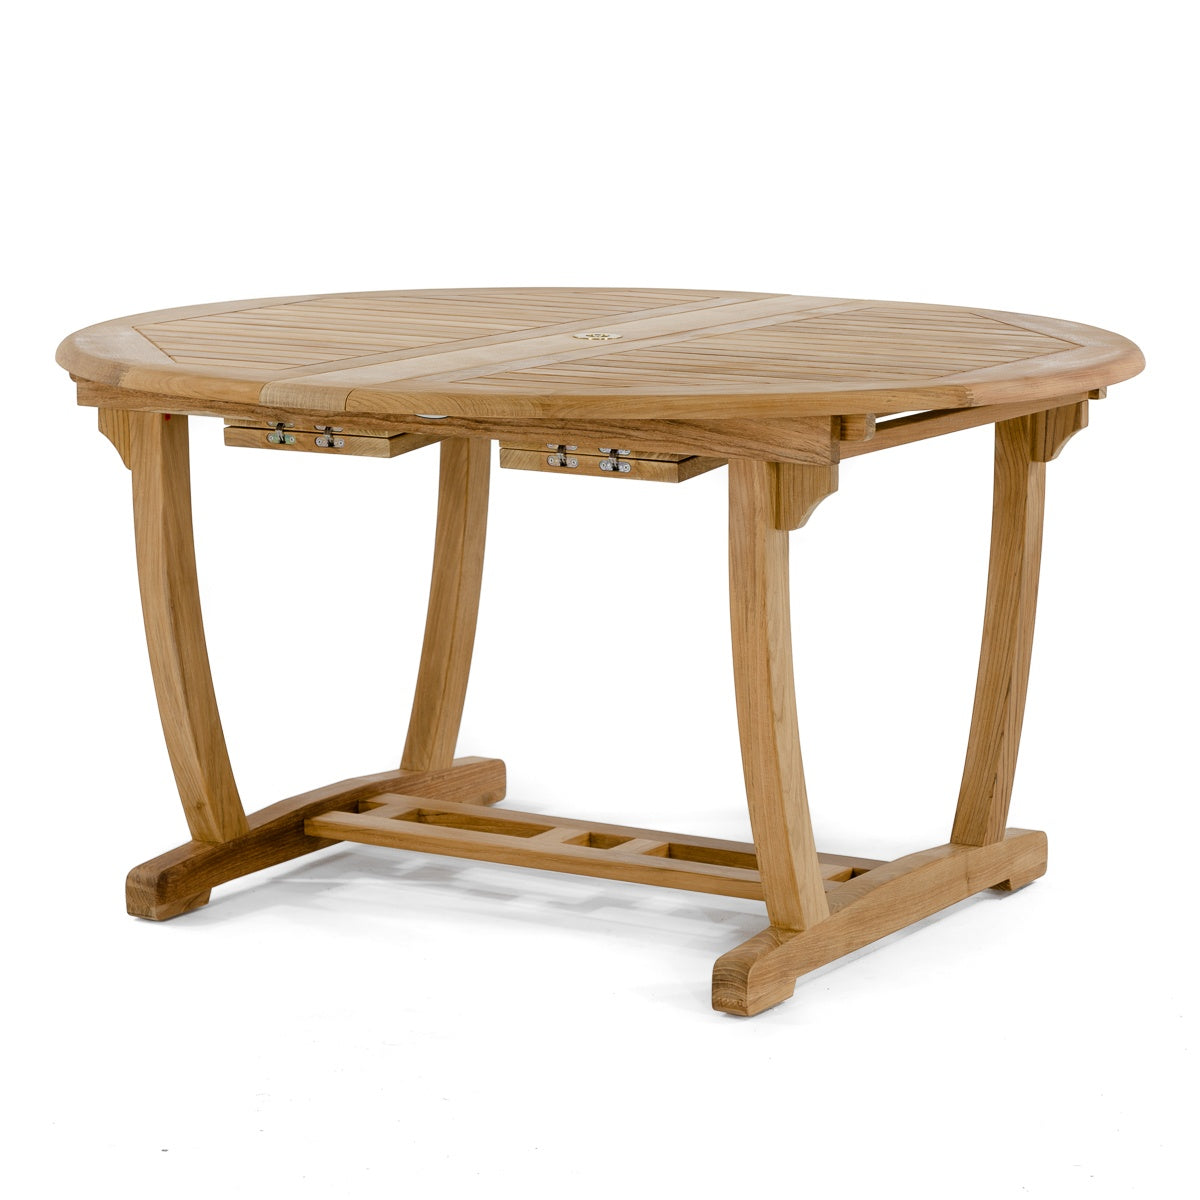 Westminster Teak - Martinique Teak Table Closed 55"; Extends to Oval 65" and 75" - 15548